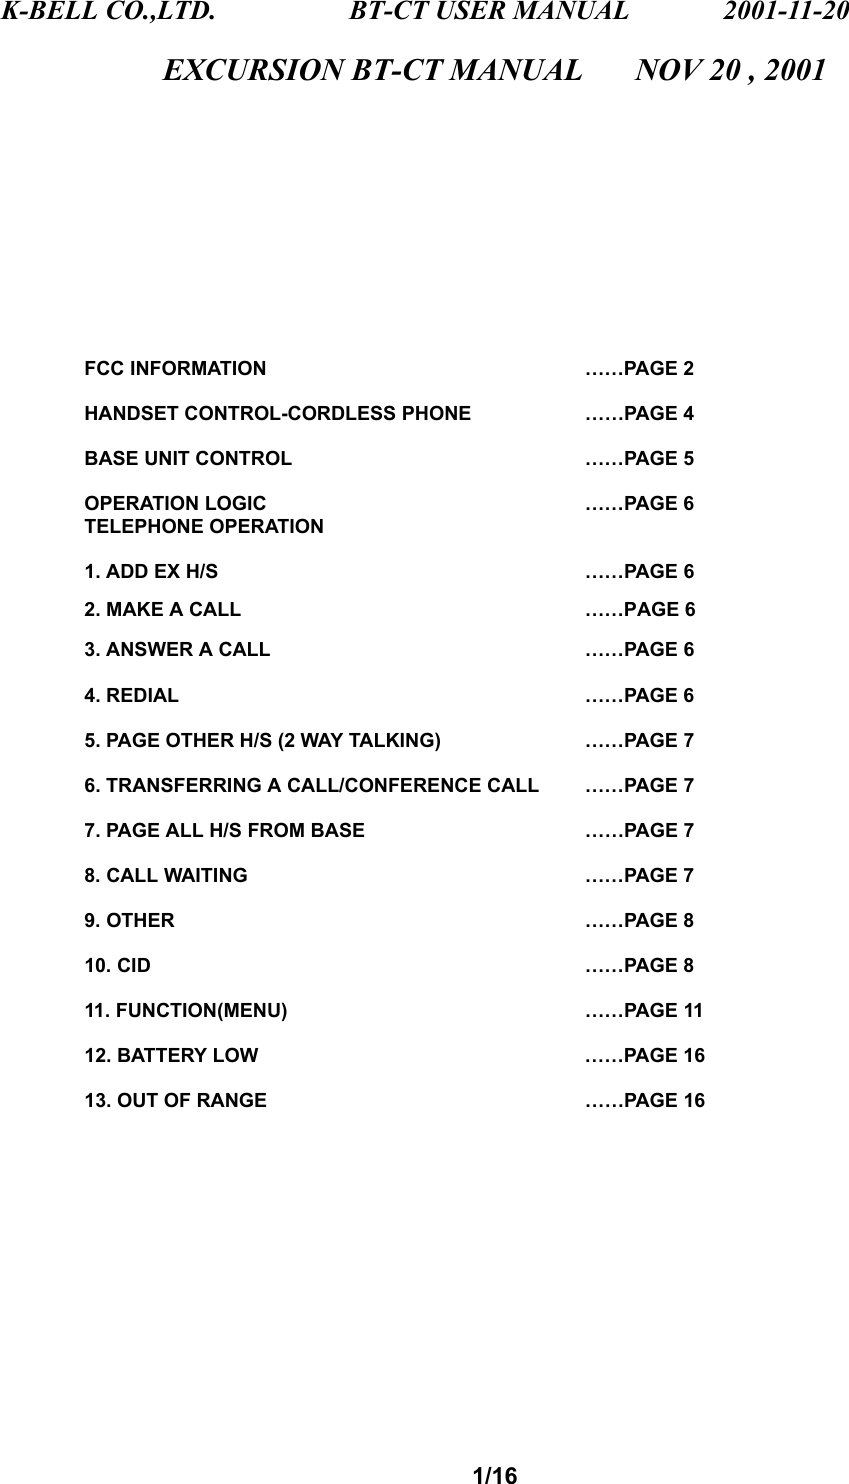 K-BELL CO.,LTD.                 BT-CT USER MANUAL            2001-11-20 1/16 EXCURSION BT-CT MANUAL        NOV 20 , 2001             FCC INFORMATION      ……PAGE 2  HANDSET CONTROL-CORDLESS PHONE    ……PAGE 4  BASE UNIT CONTROL     ……PAGE 5  OPERATION LOGIC    ……PAGE 6 TELEPHONE OPERATION  1. ADD EX H/S     ……PAGE 6          2. MAKE A CALL     ……PAGE 6          3. ANSWER A CALL    ……PAGE 6  4. REDIAL     ……PAGE 6  5. PAGE OTHER H/S (2 WAY TALKING)    ……PAGE 7  6. TRANSFERRING A CALL/CONFERENCE CALL  ……PAGE 7  7. PAGE ALL H/S FROM BASE      ……PAGE 7   8. CALL WAITING     ……PAGE 7  9. OTHER     ……PAGE 8  10. CID      ……PAGE 8  11. FUNCTION(MENU)    ……PAGE 11  12. BATTERY LOW    ……PAGE 16  13. OUT OF RANGE    ……PAGE 16             